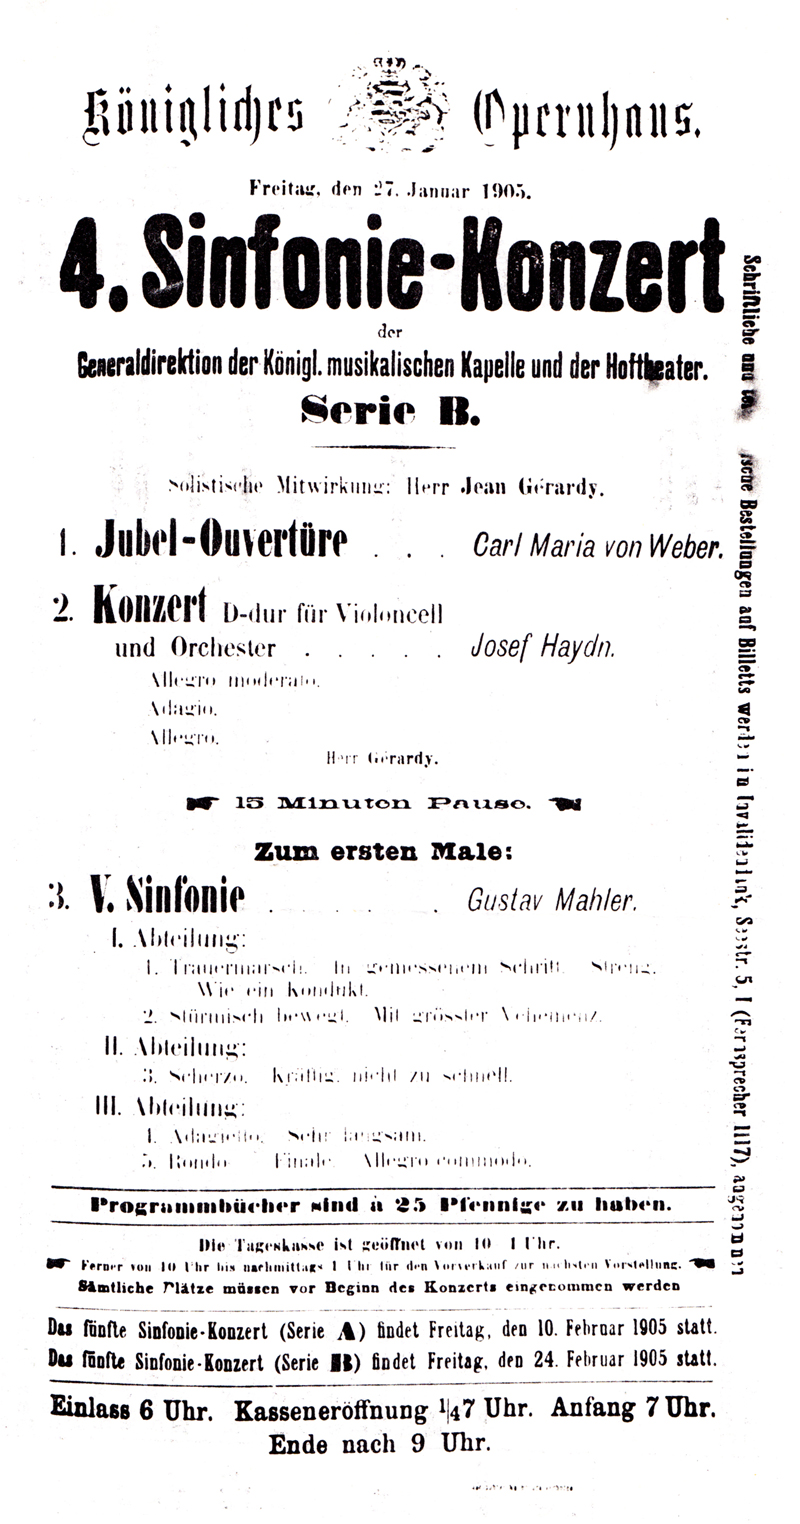 b&w facsimile of a handbill for the second performance of Mahler's Fifth Symphony